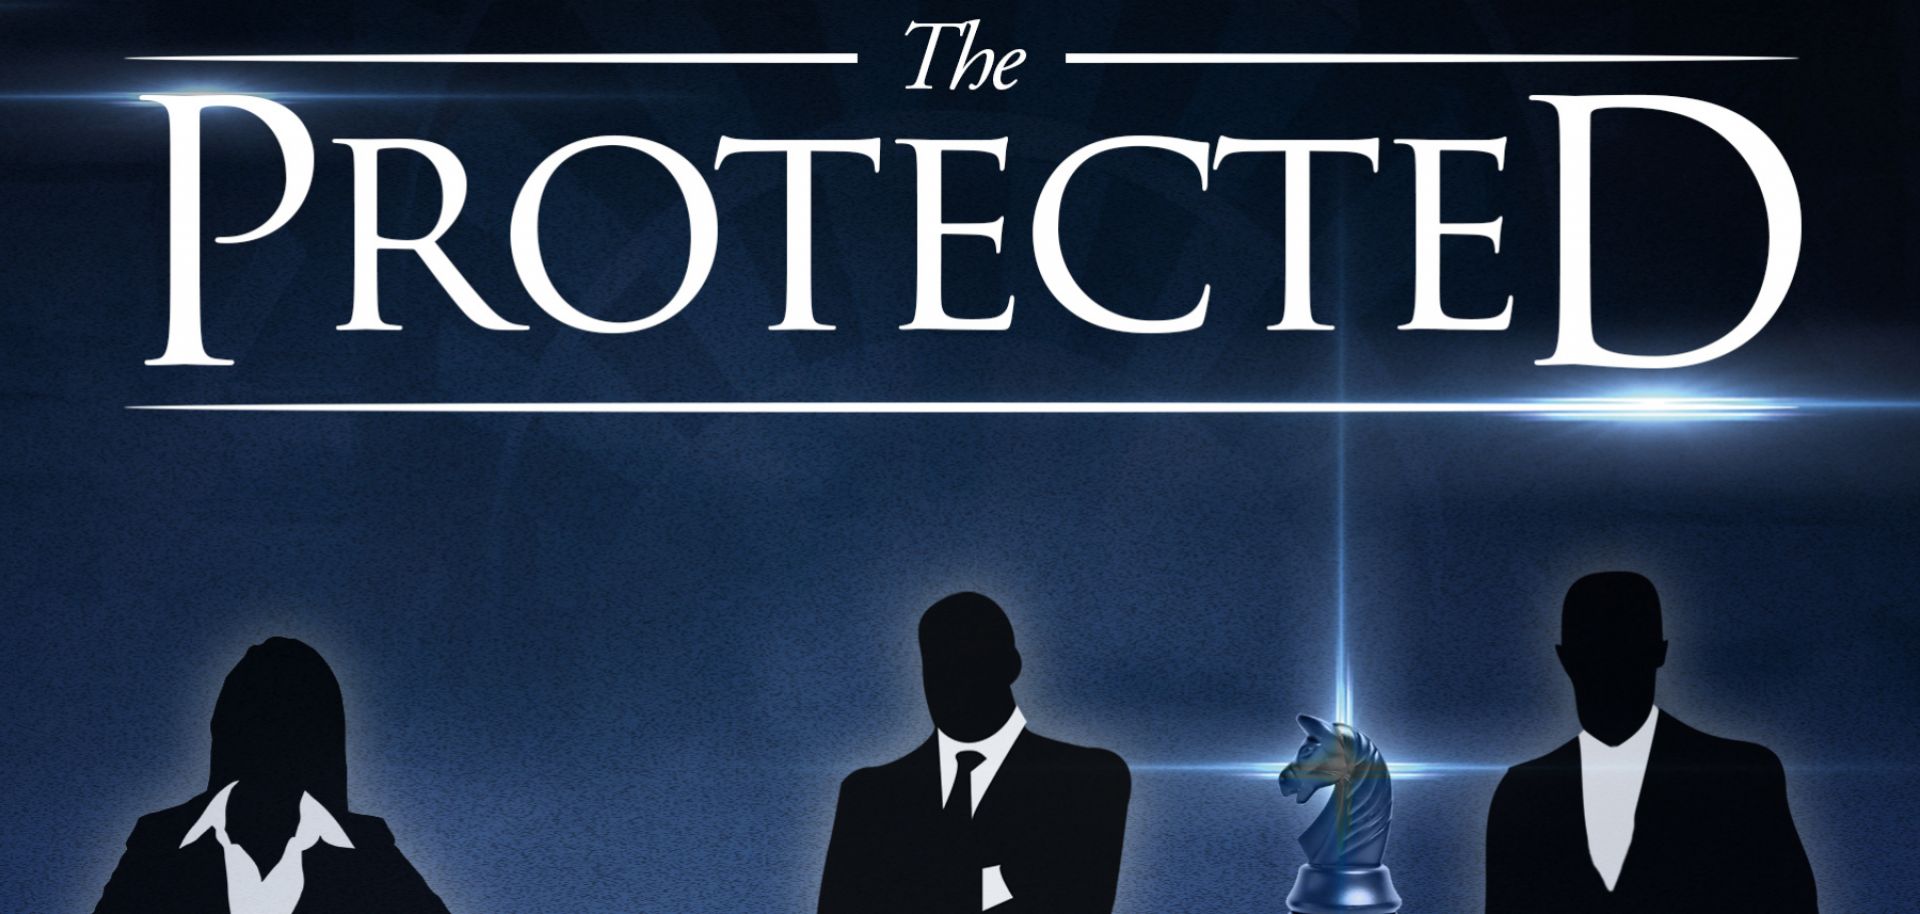 In this episode of the Stratfor Podcast, Chief Security Officer Fred Burton sits down with international security and intelligence professional and author, Michael W. Trott to discuss his book, The Protected, which offers a peek inside the practice of executive protection.